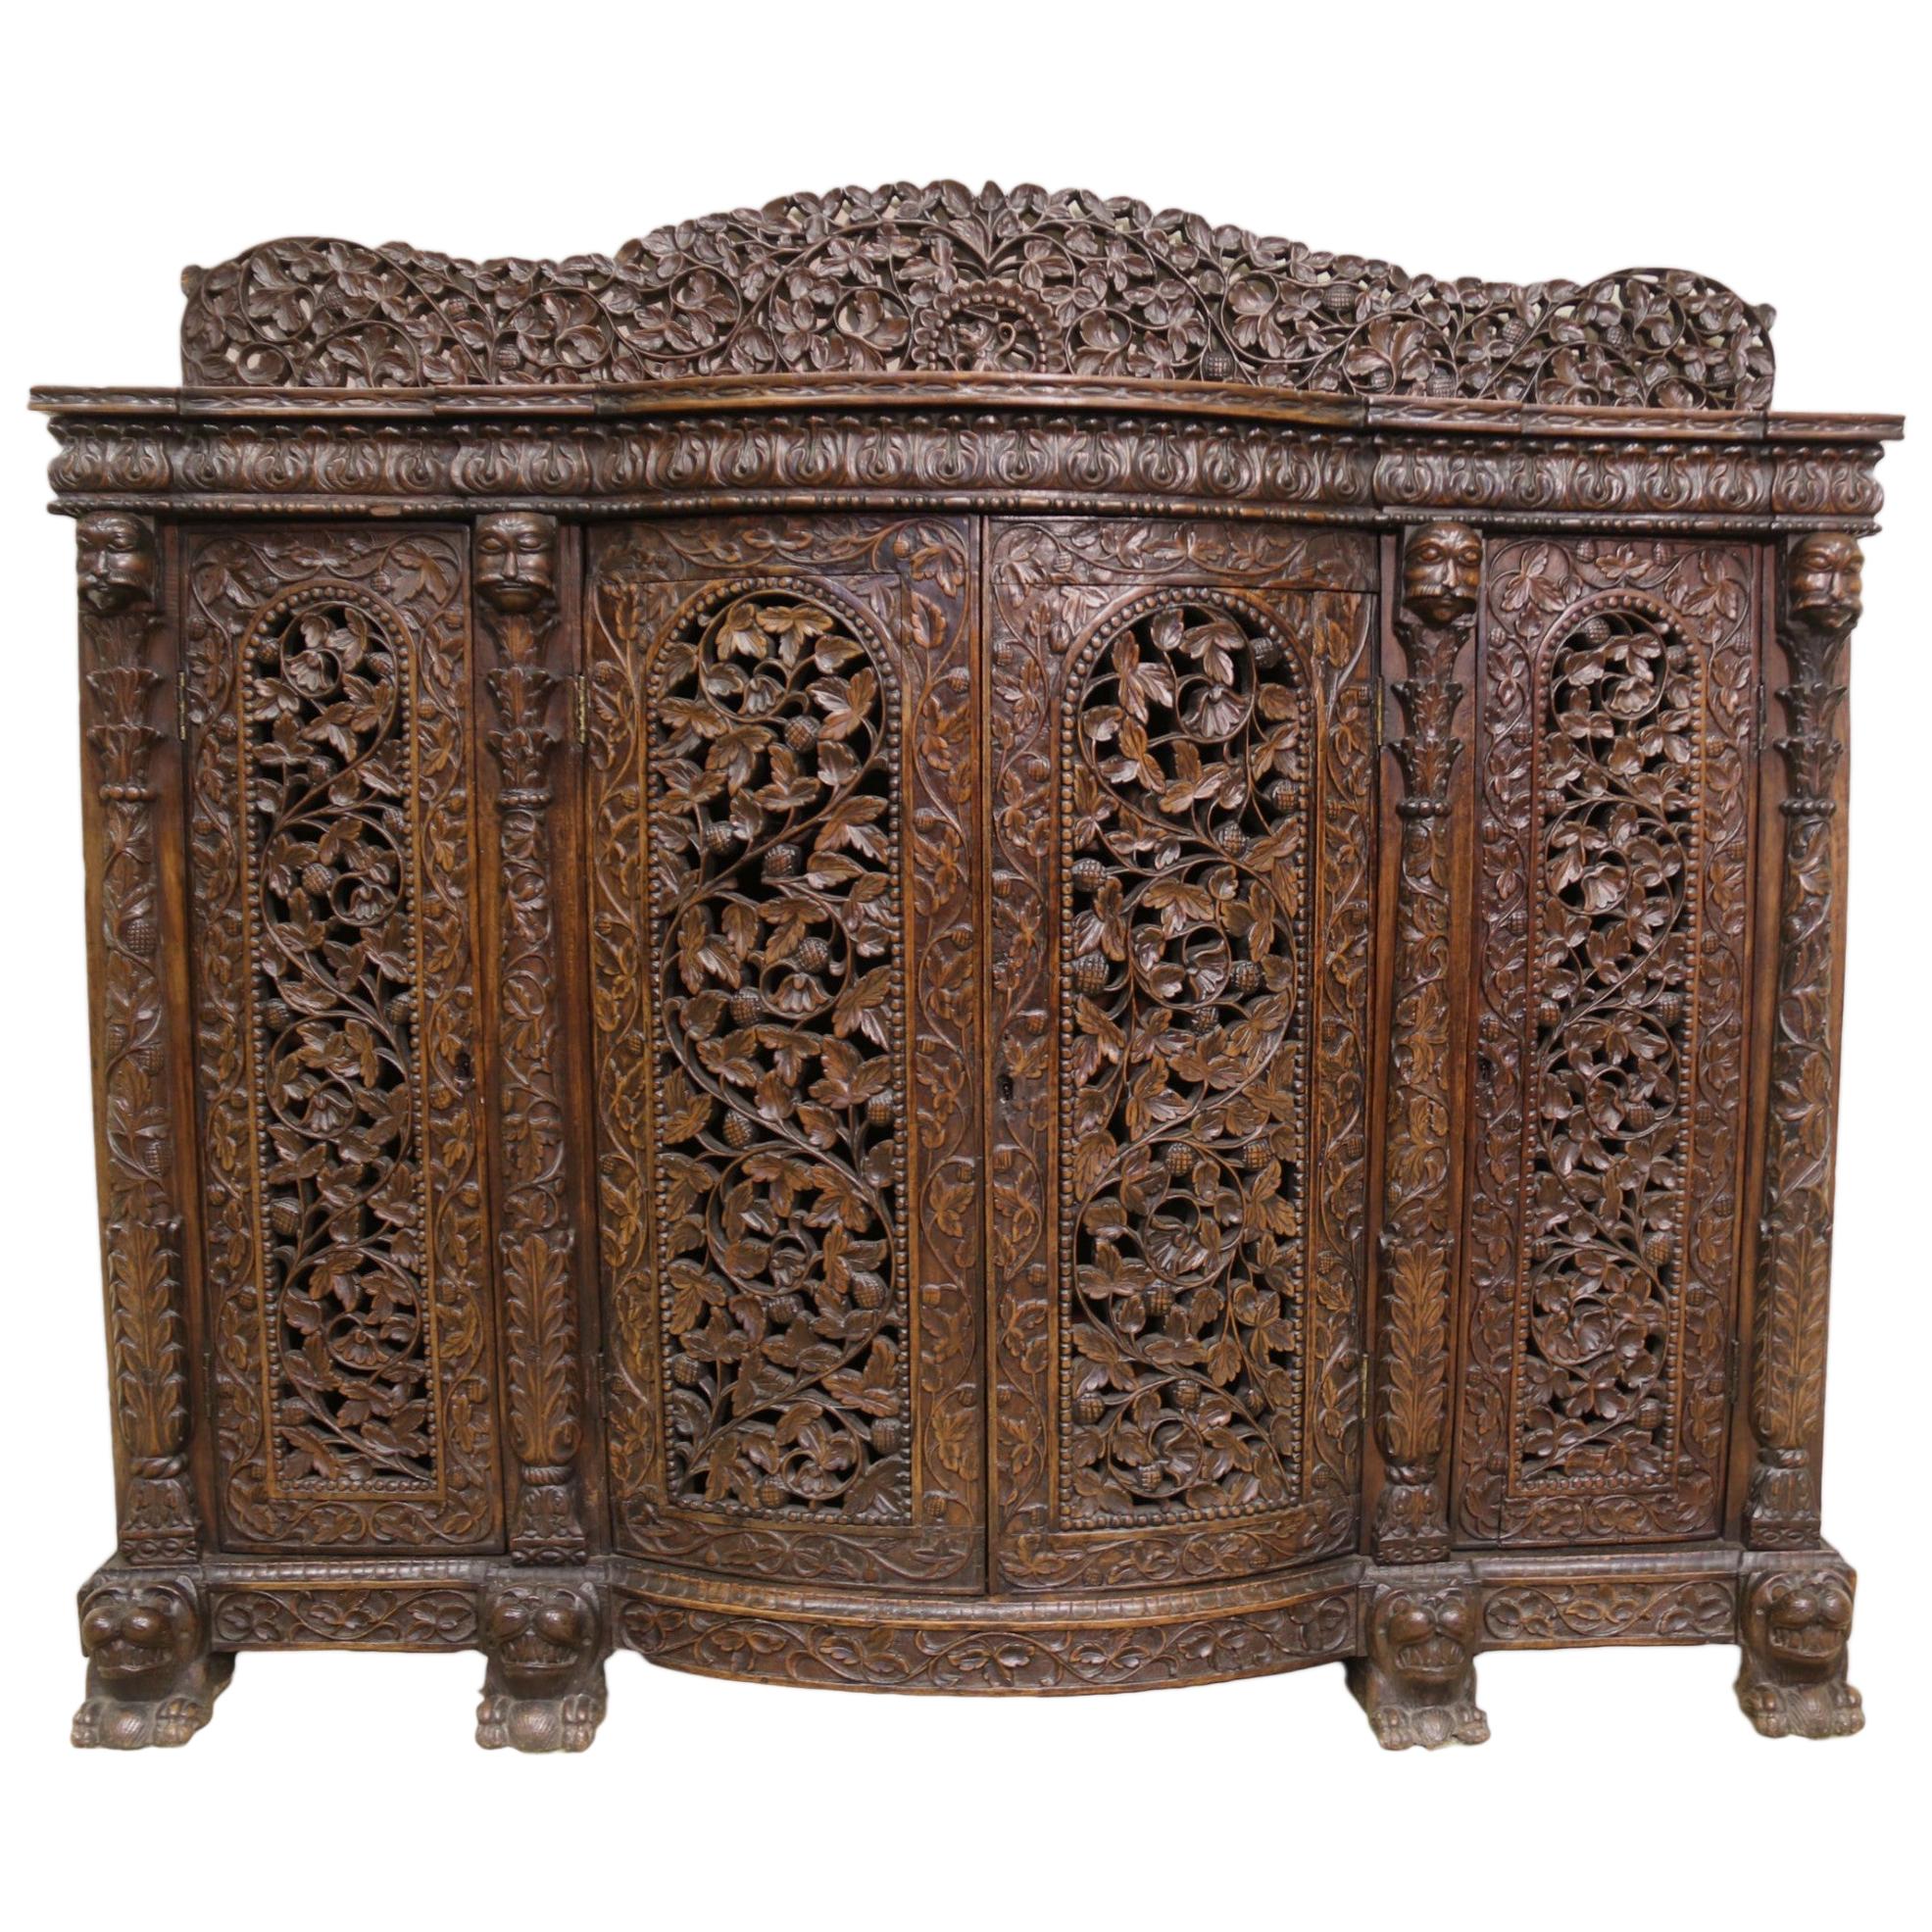 19th Century Indian Ornately Carved Padauk Wood Four-Door Side Cabinet For Sale